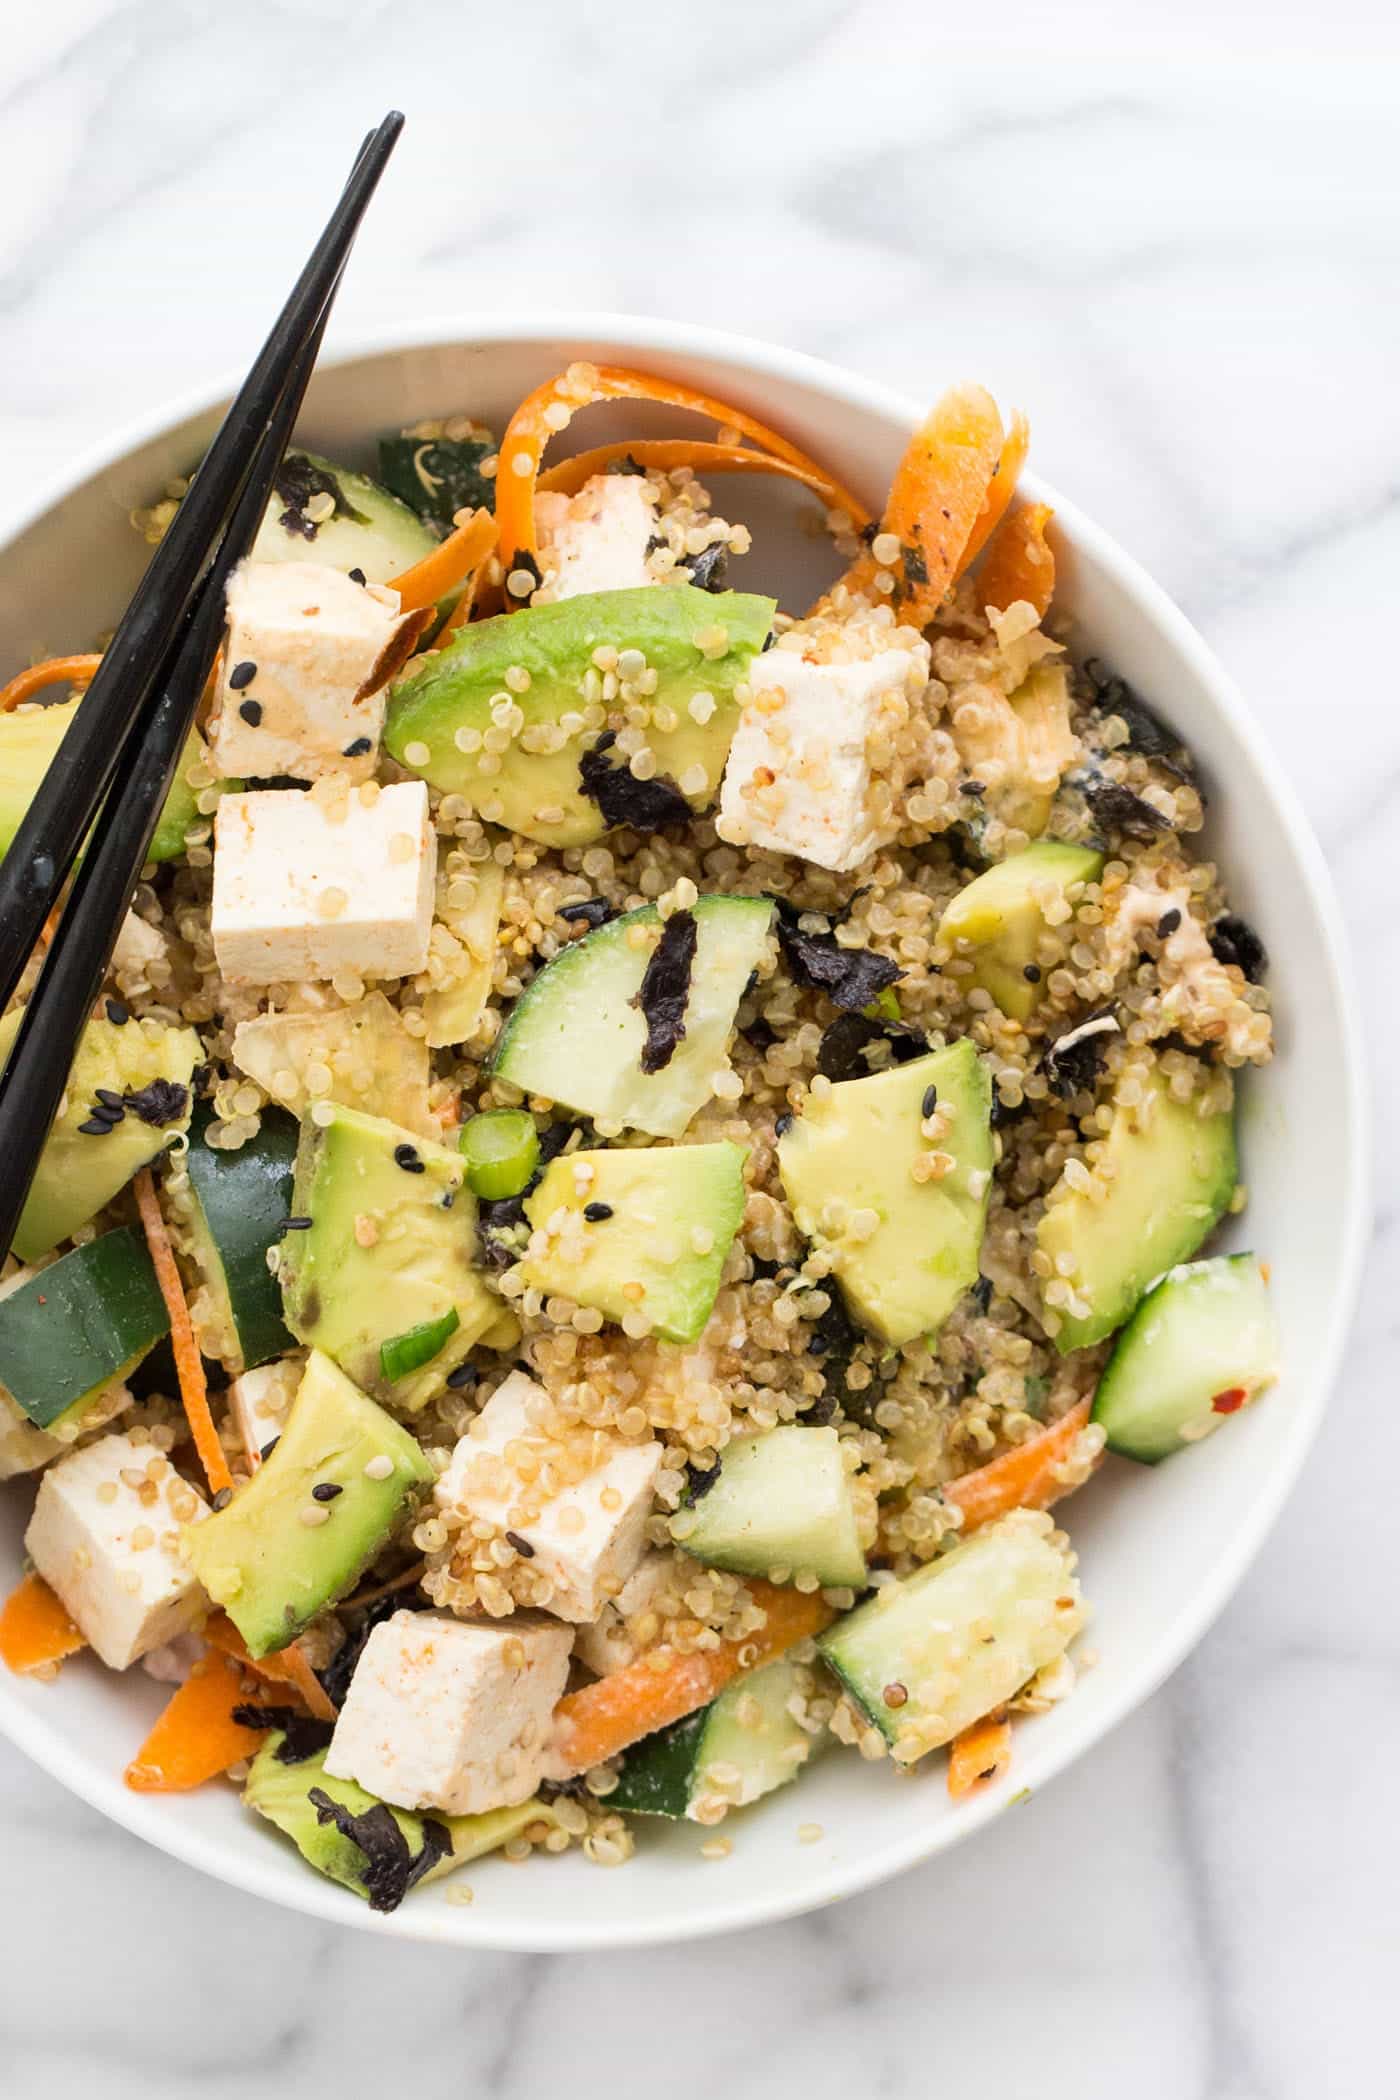 These SIMPLE Quinoa Sushi Bowls are seriously the BEST! So much easier than making sushi at home and they've got all the same flavors!